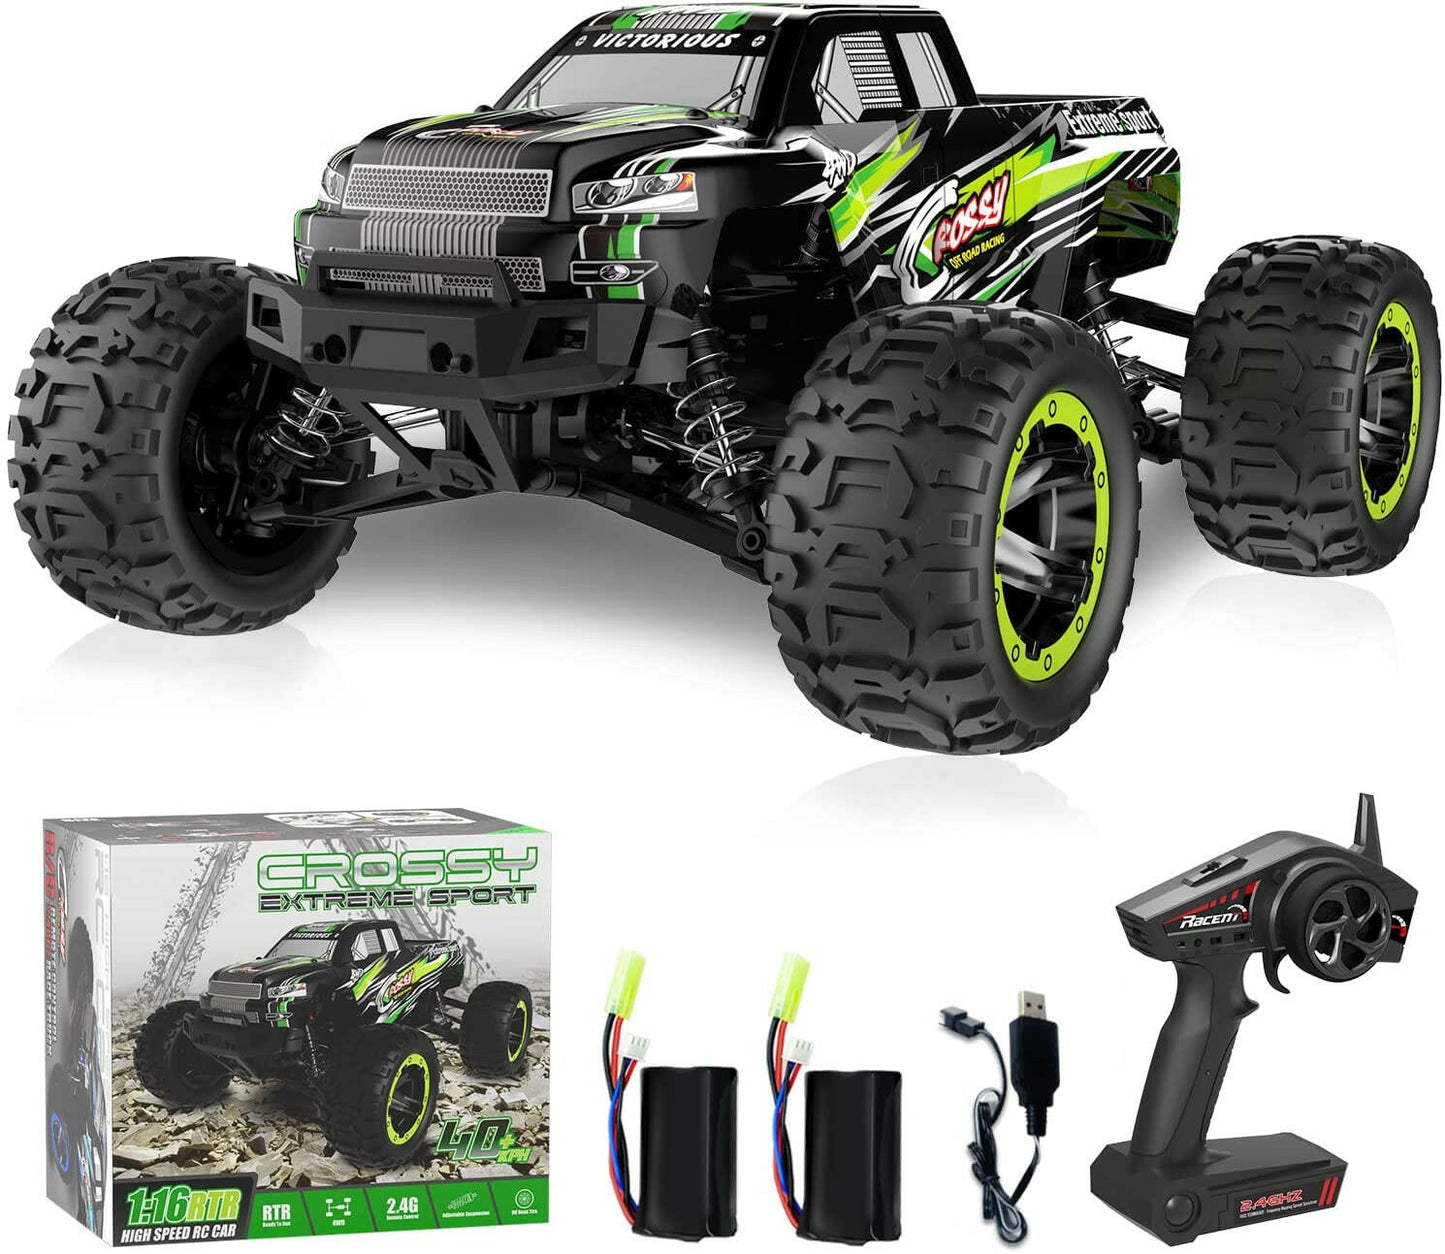 RACENT Crossy 1/16 RC Truck 30mph High Speed Racing Remote Control Car Great Gift 2 pcs Batteries